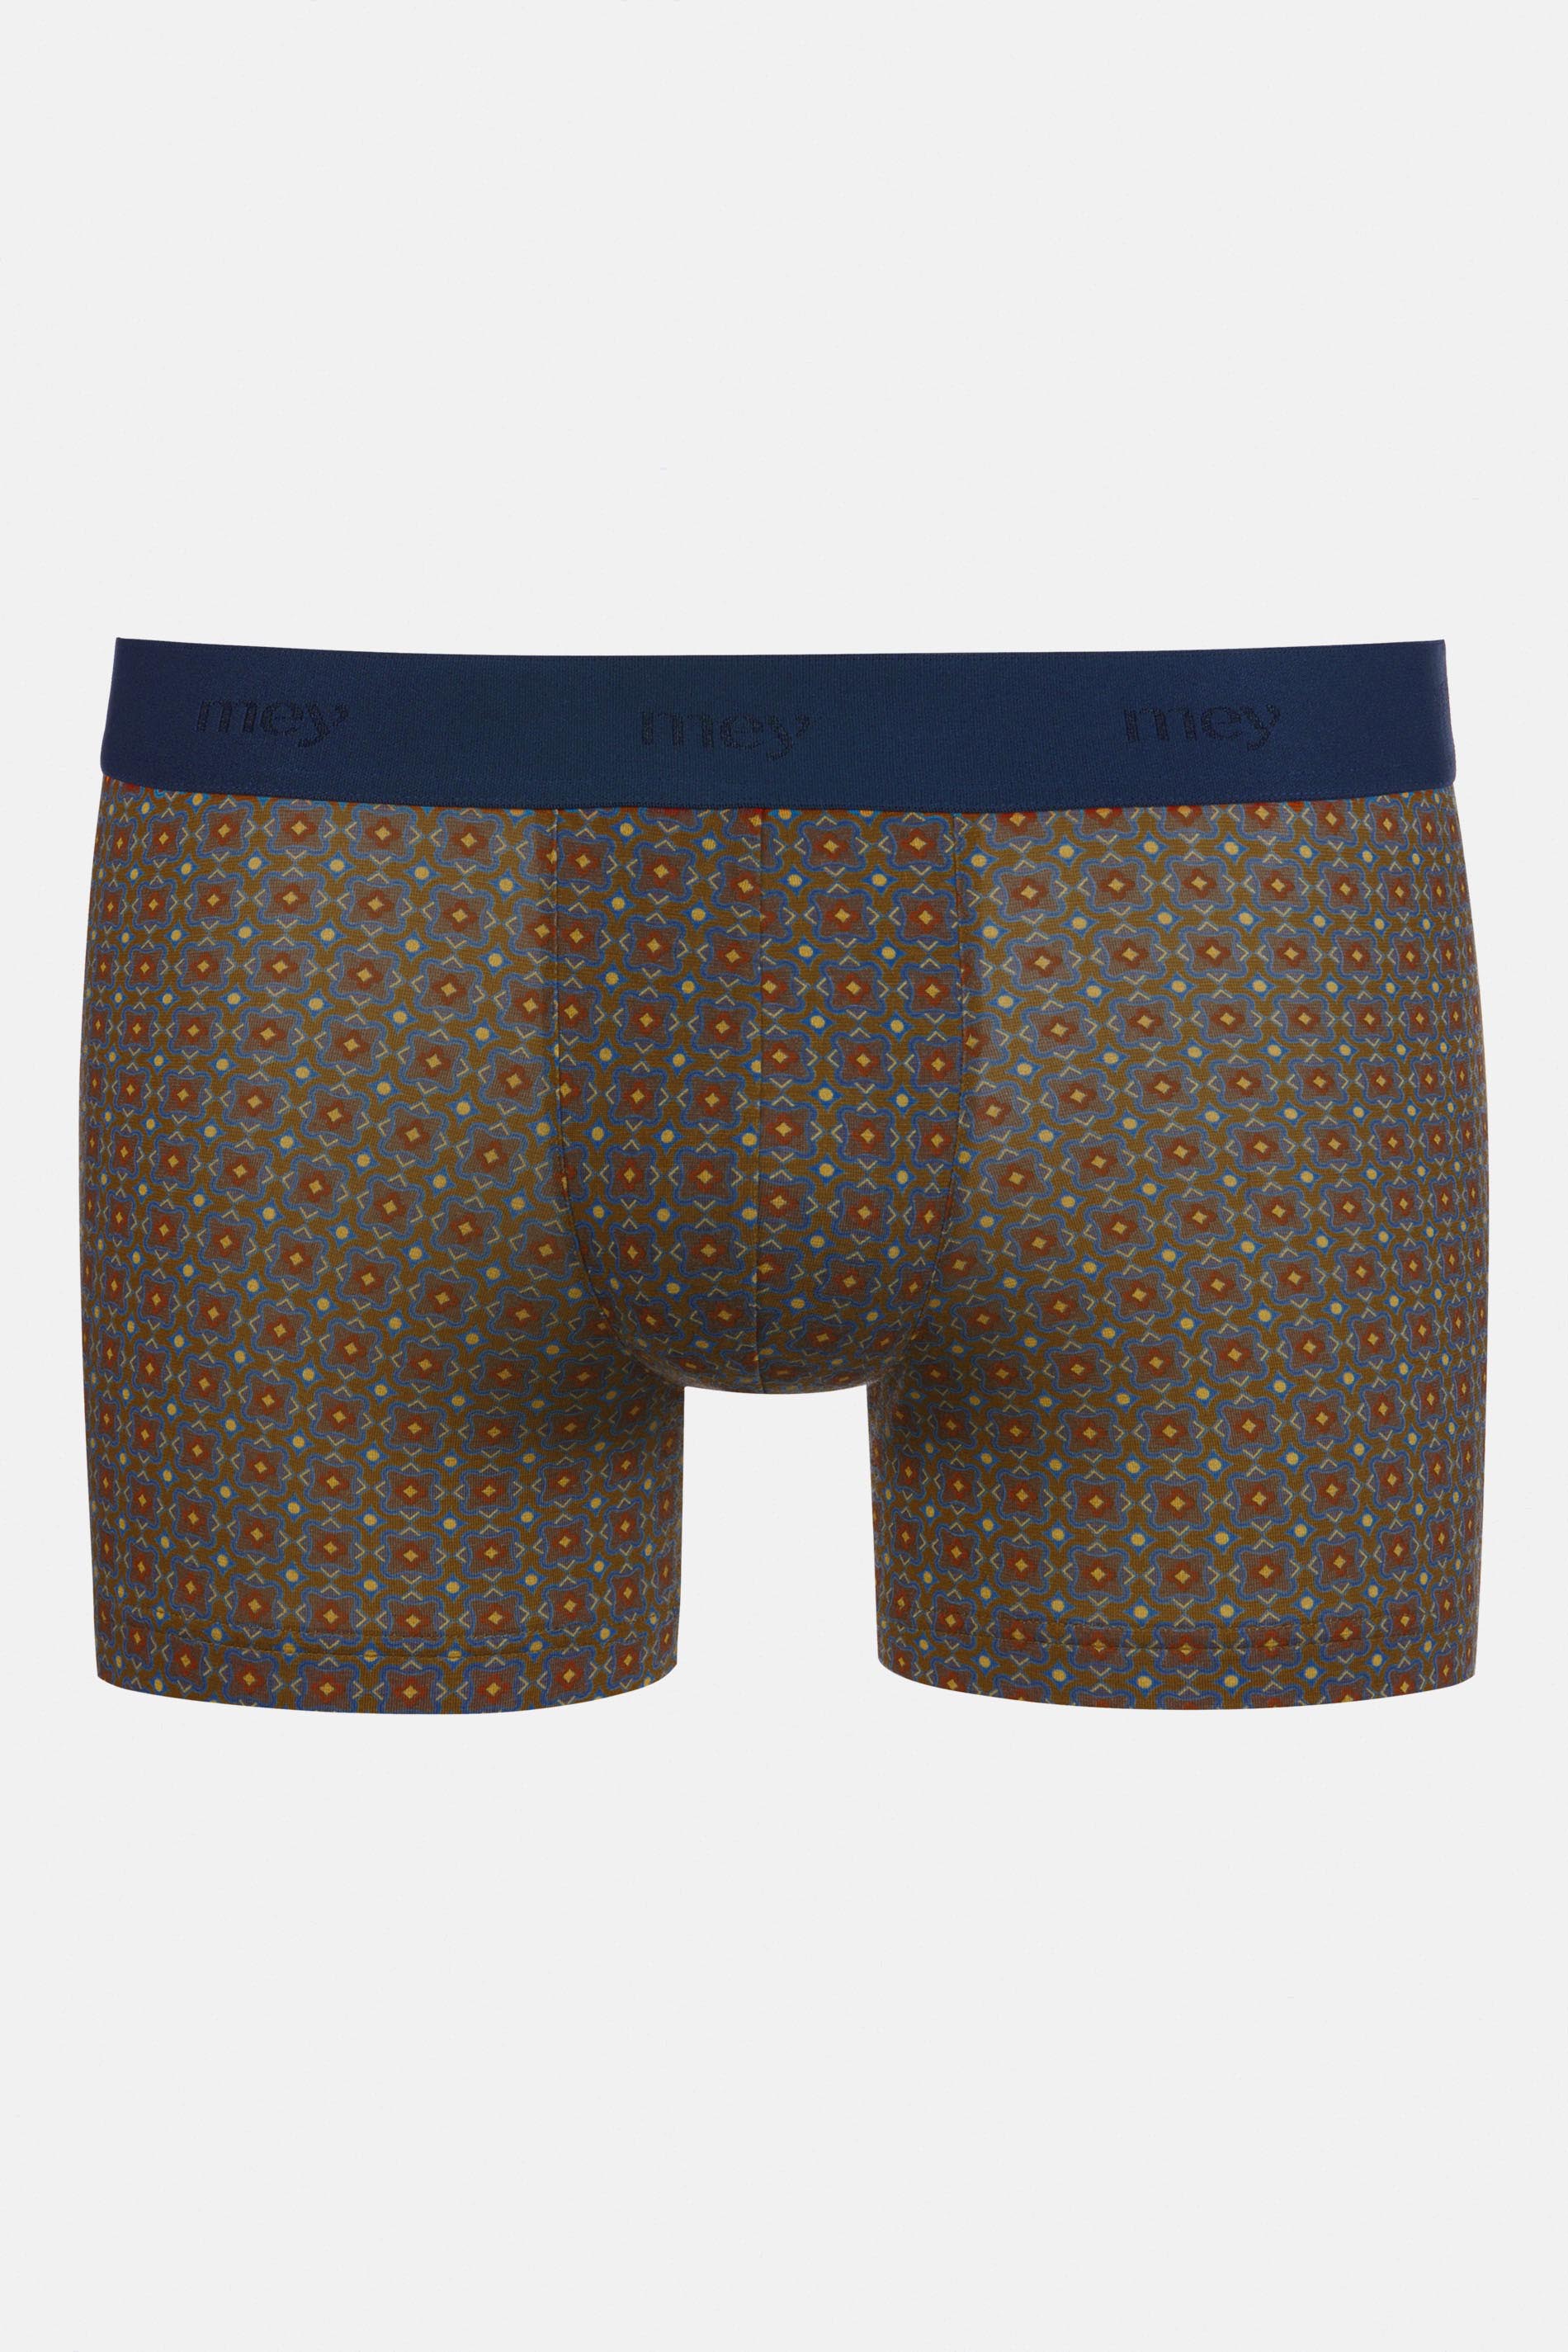 Shorty Serie Retro Print Uitknippen | mey®